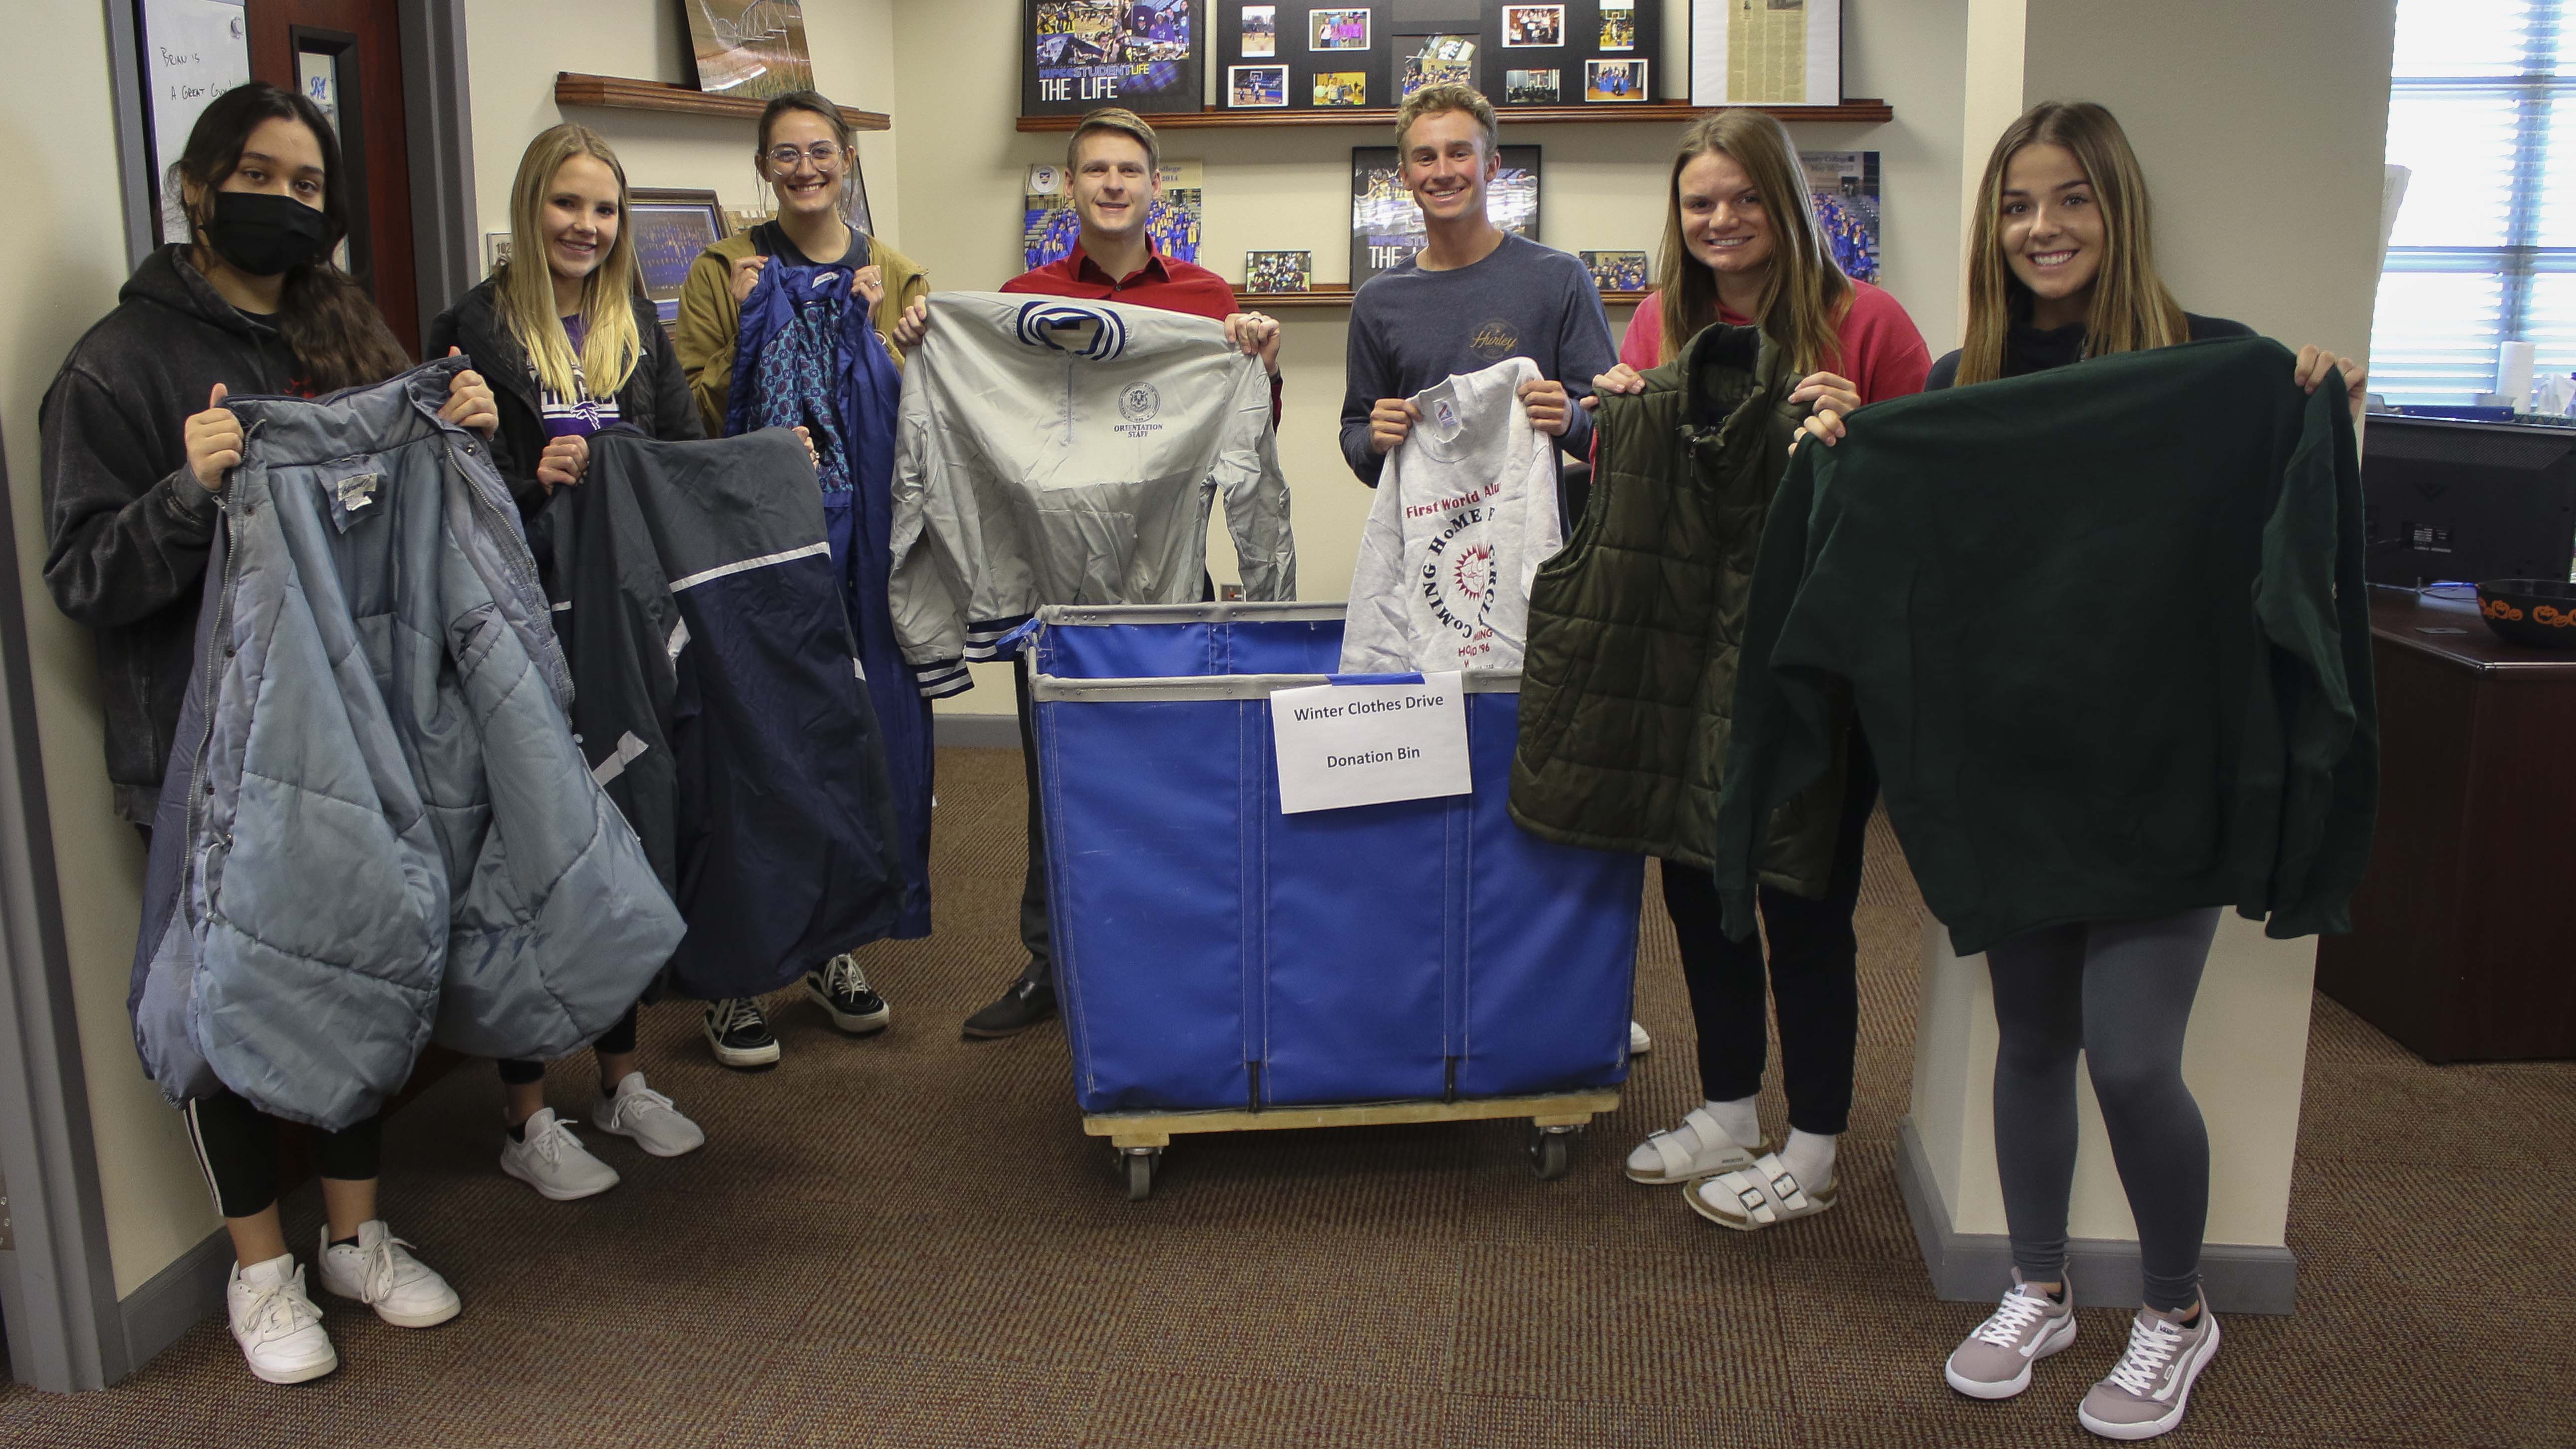 Members of the McCook Community College Student Senate gather around the bin where they are collecting warm-weather clothing for fellow students. Students include (from left): Leslie Hernandez, McCook; Neleigh Hauxwell, Culbertson; Annika Johnson, McCook; Reese Dellevot, McCook; Jordan DeMarce, Las Vegas; Taylor Thein, West Branch, Iowa; and Rae VanMilligan, Marion, Iowa.